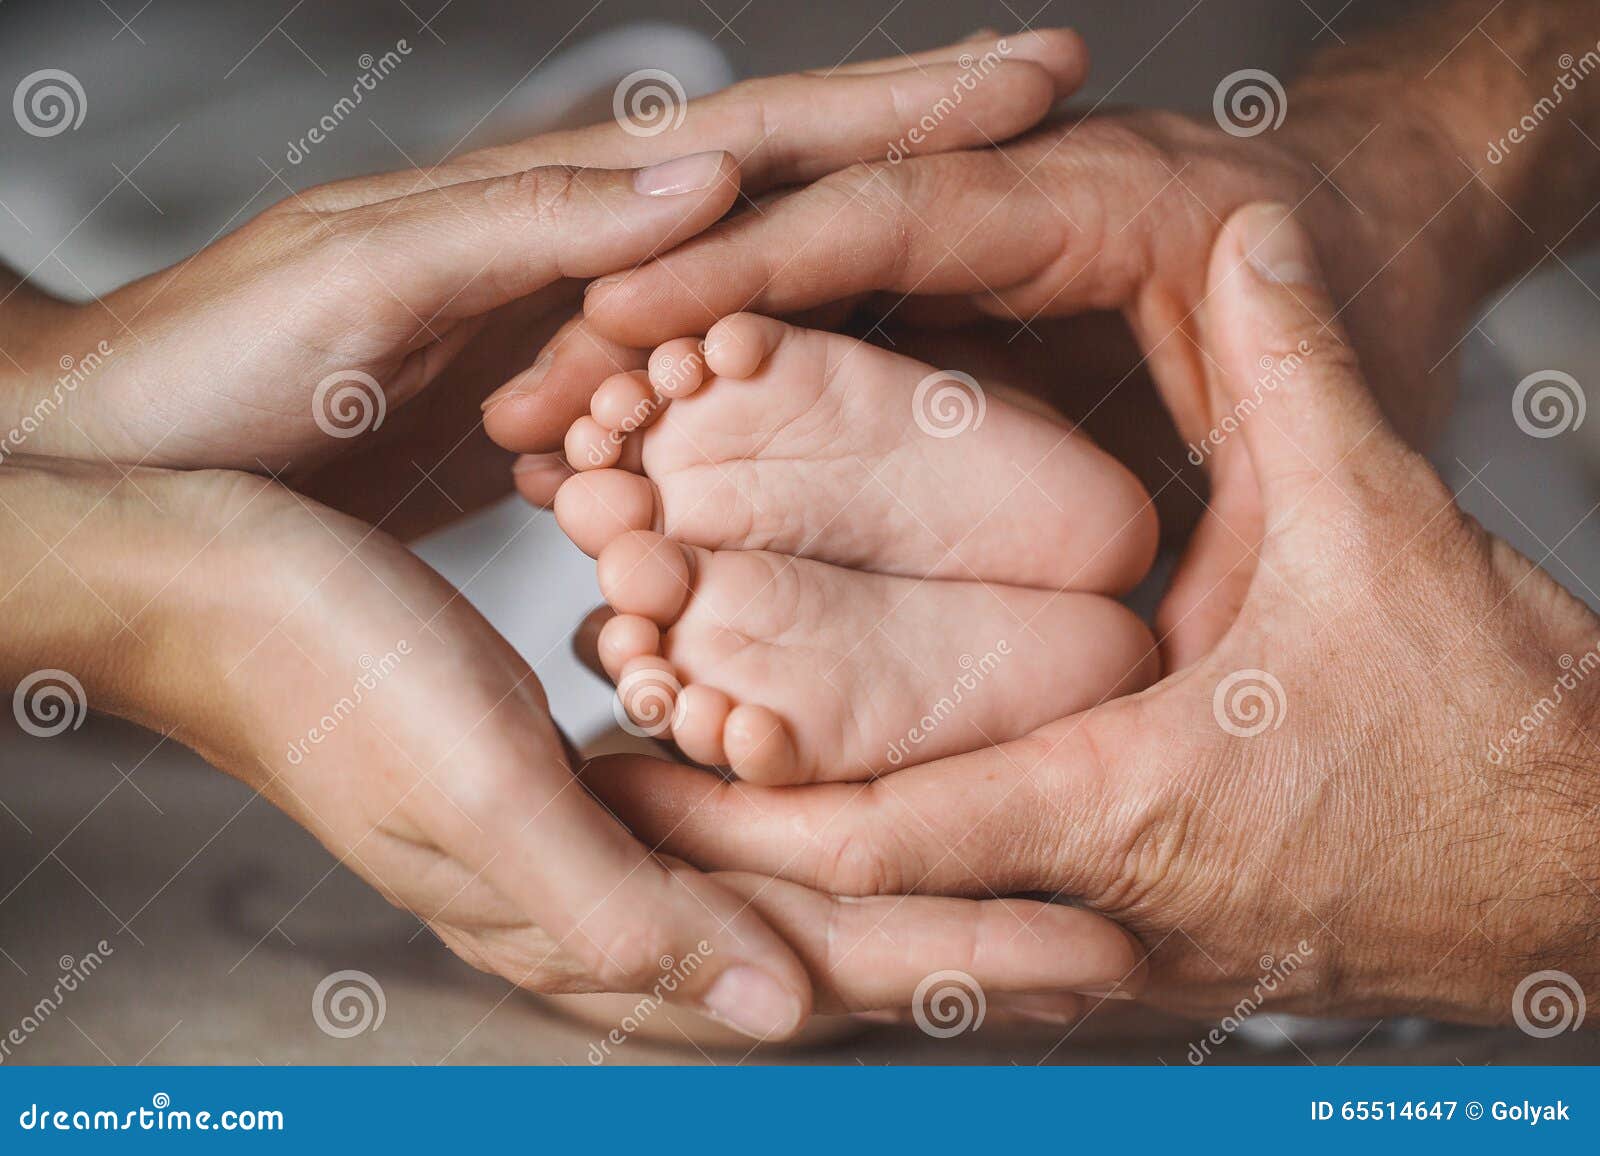 Children S Feet In Hands Of Mother And Father Stock Image